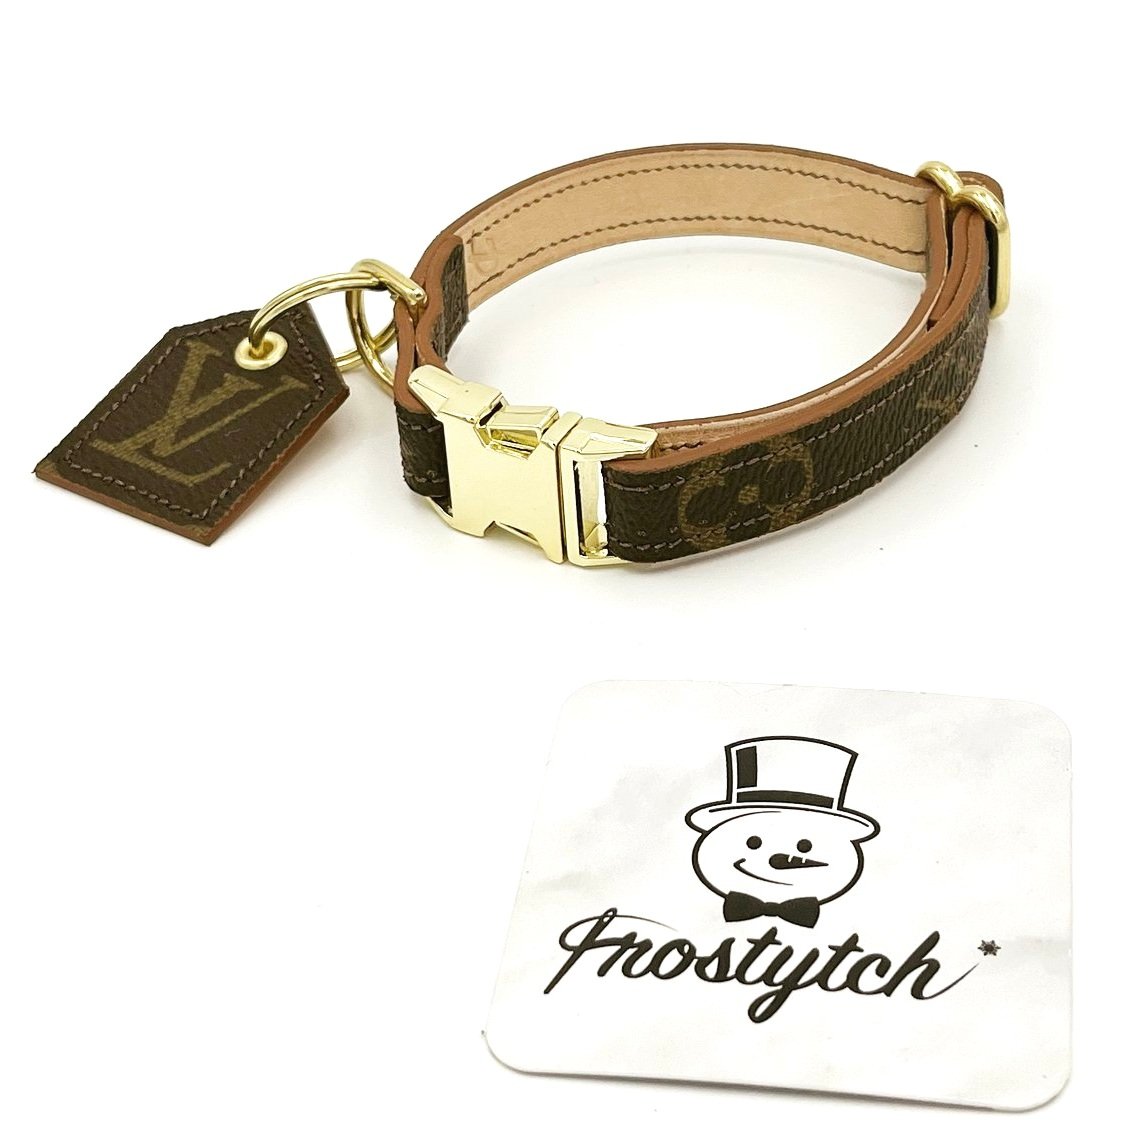 Louis Vuitton The Baxter dog collar is specially designed for